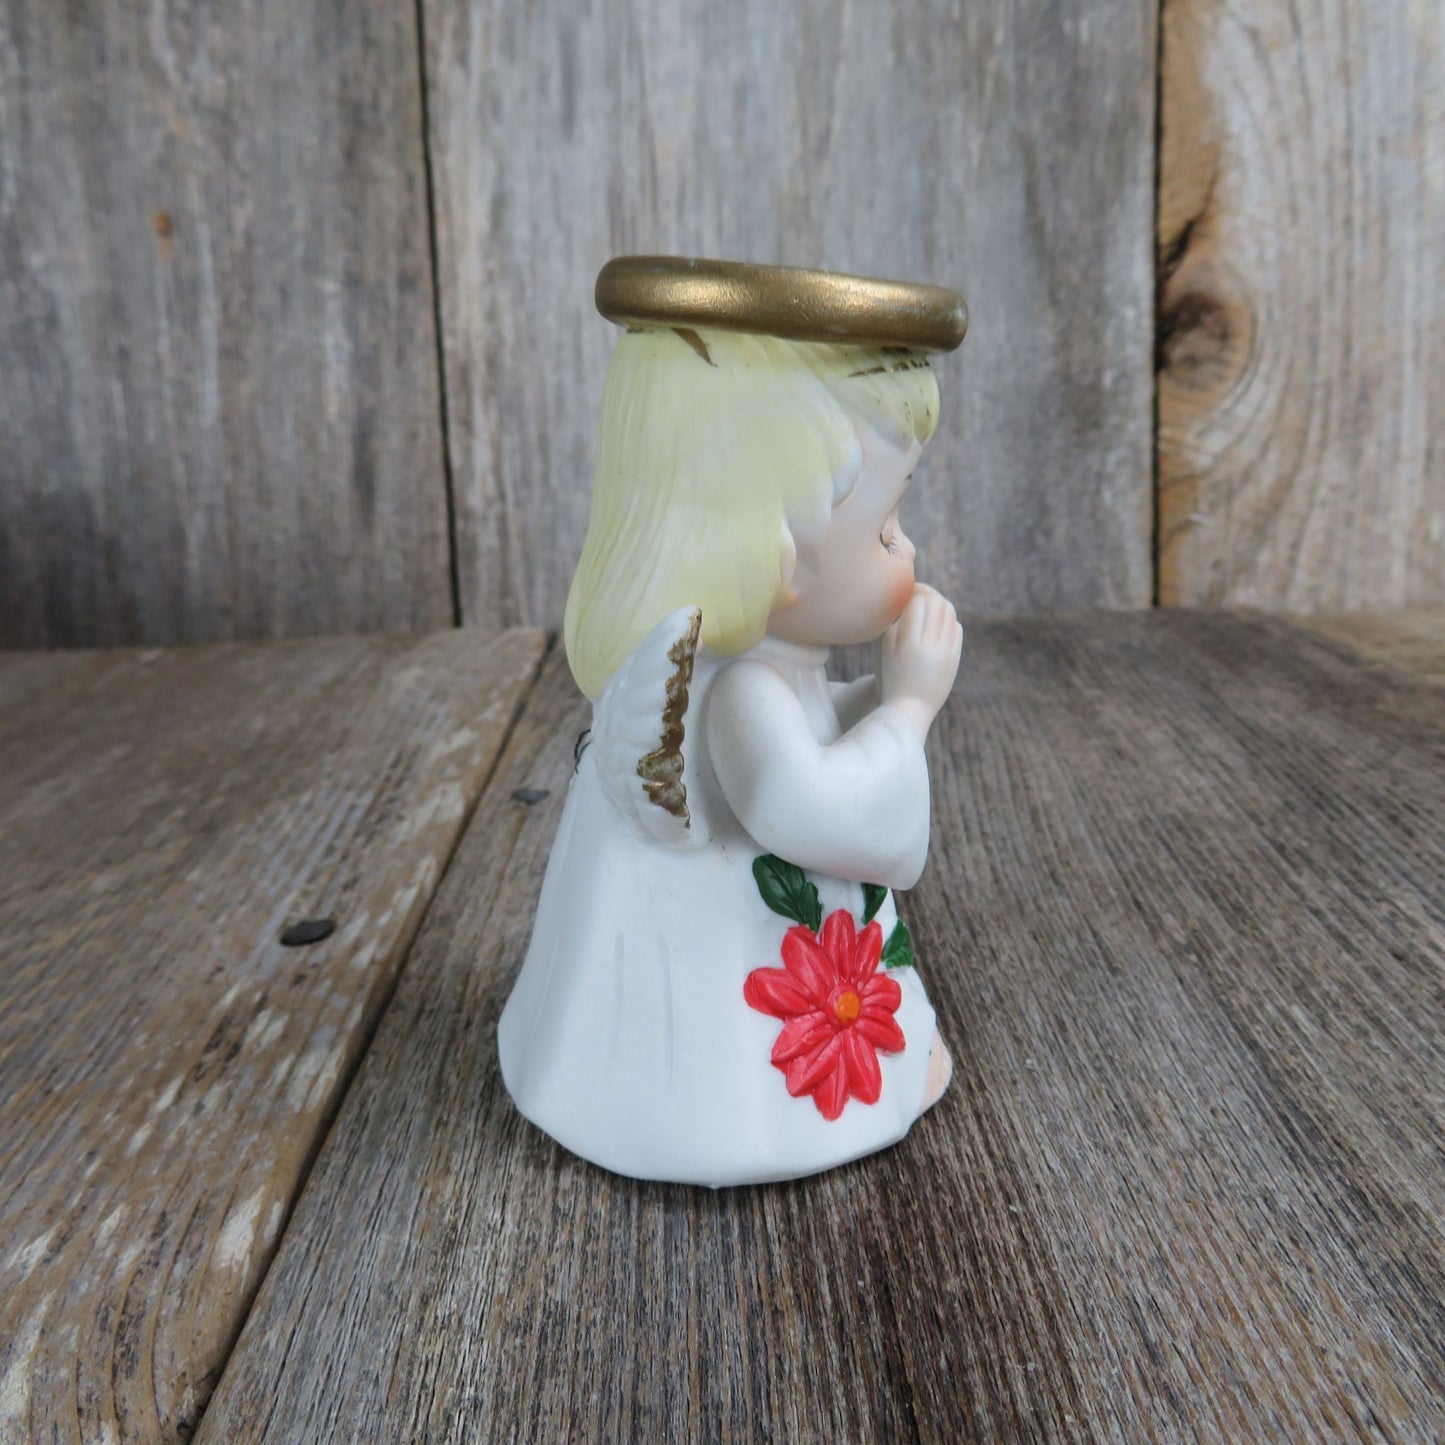 Vintage Christmas Angel Bell Figurine Poinsettia Praying Hands Eyes Closed Made in Tiawan